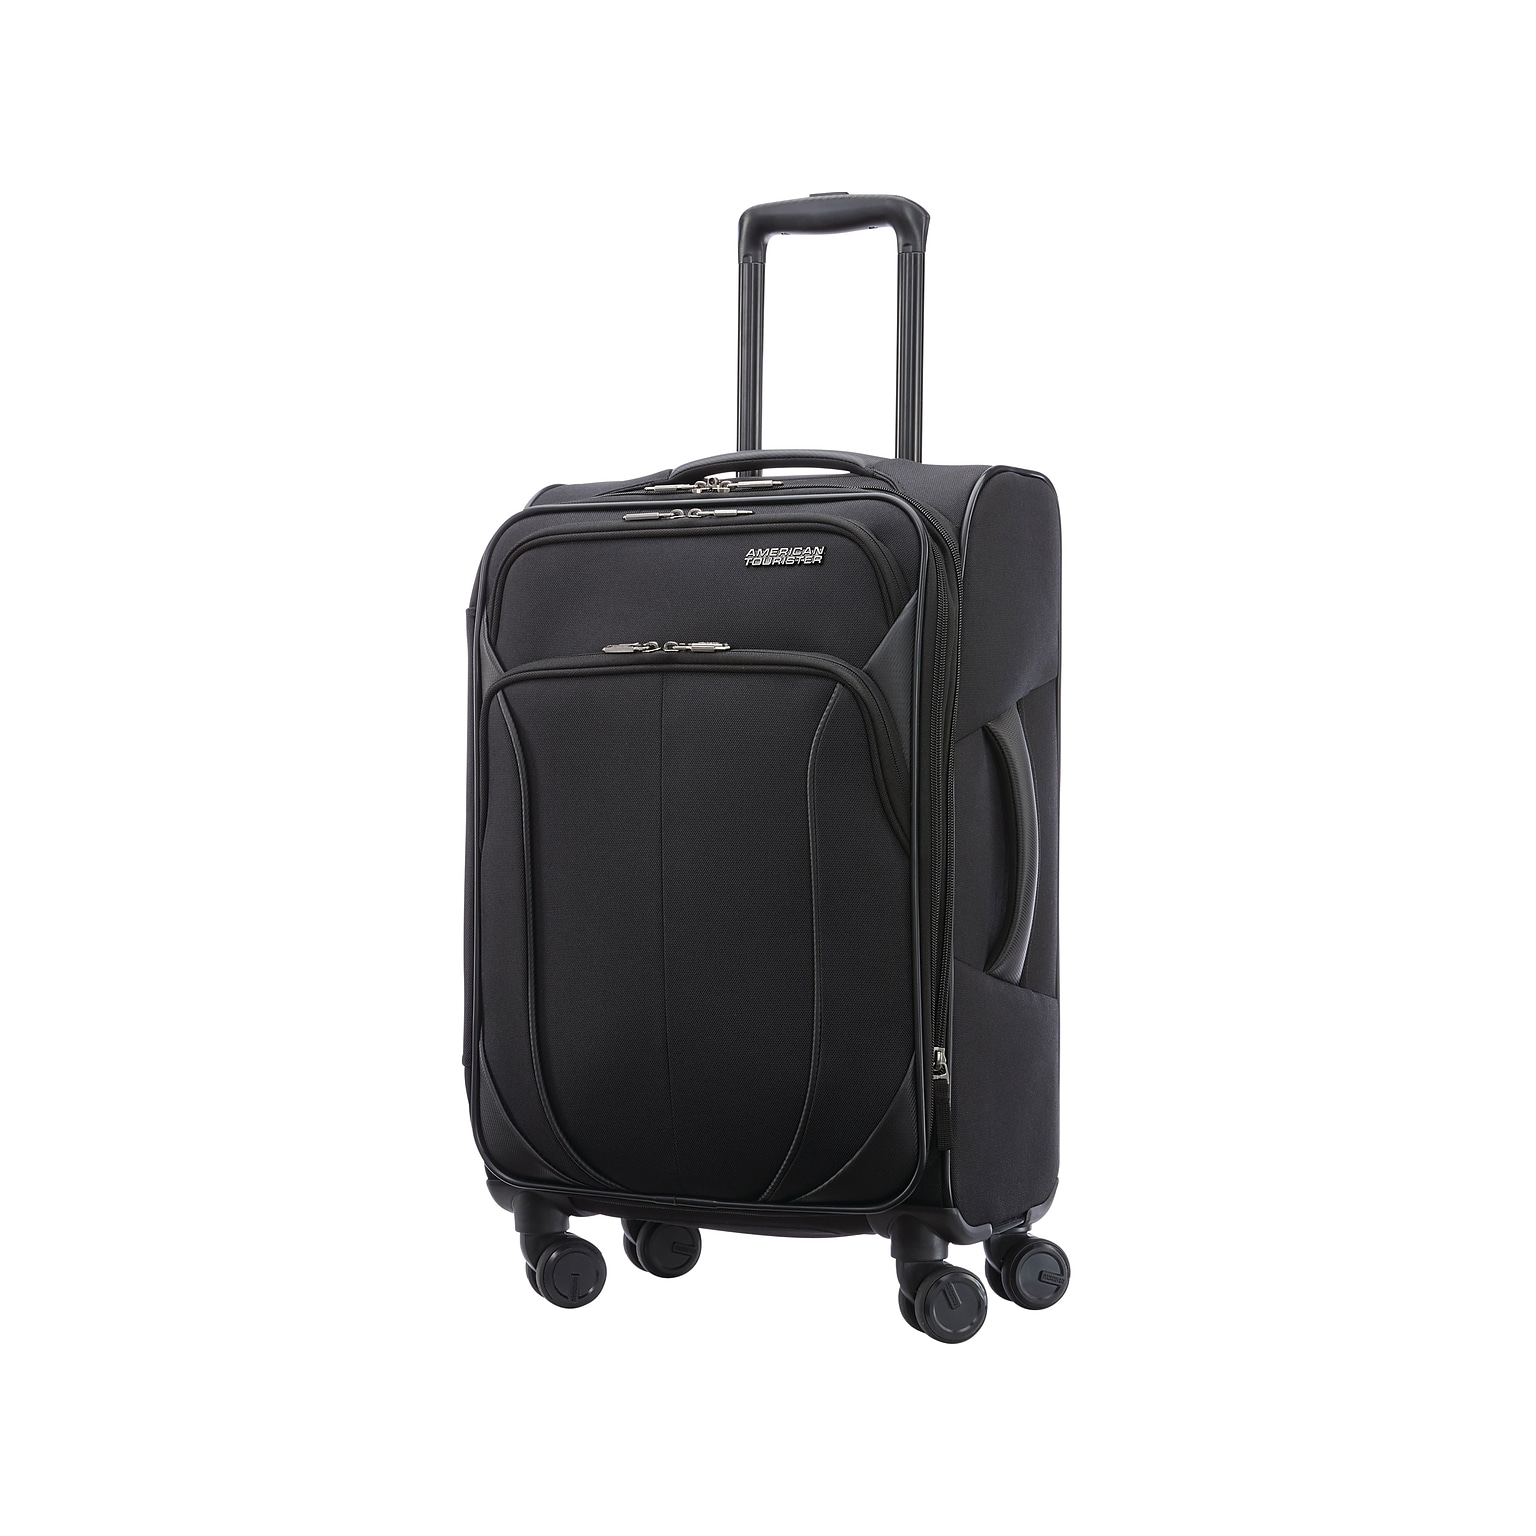 American Tourister 4 Kix 2.0 23.5 Carry-On Suitcase, 4-Wheeled Spinner, Black (142352-1041)